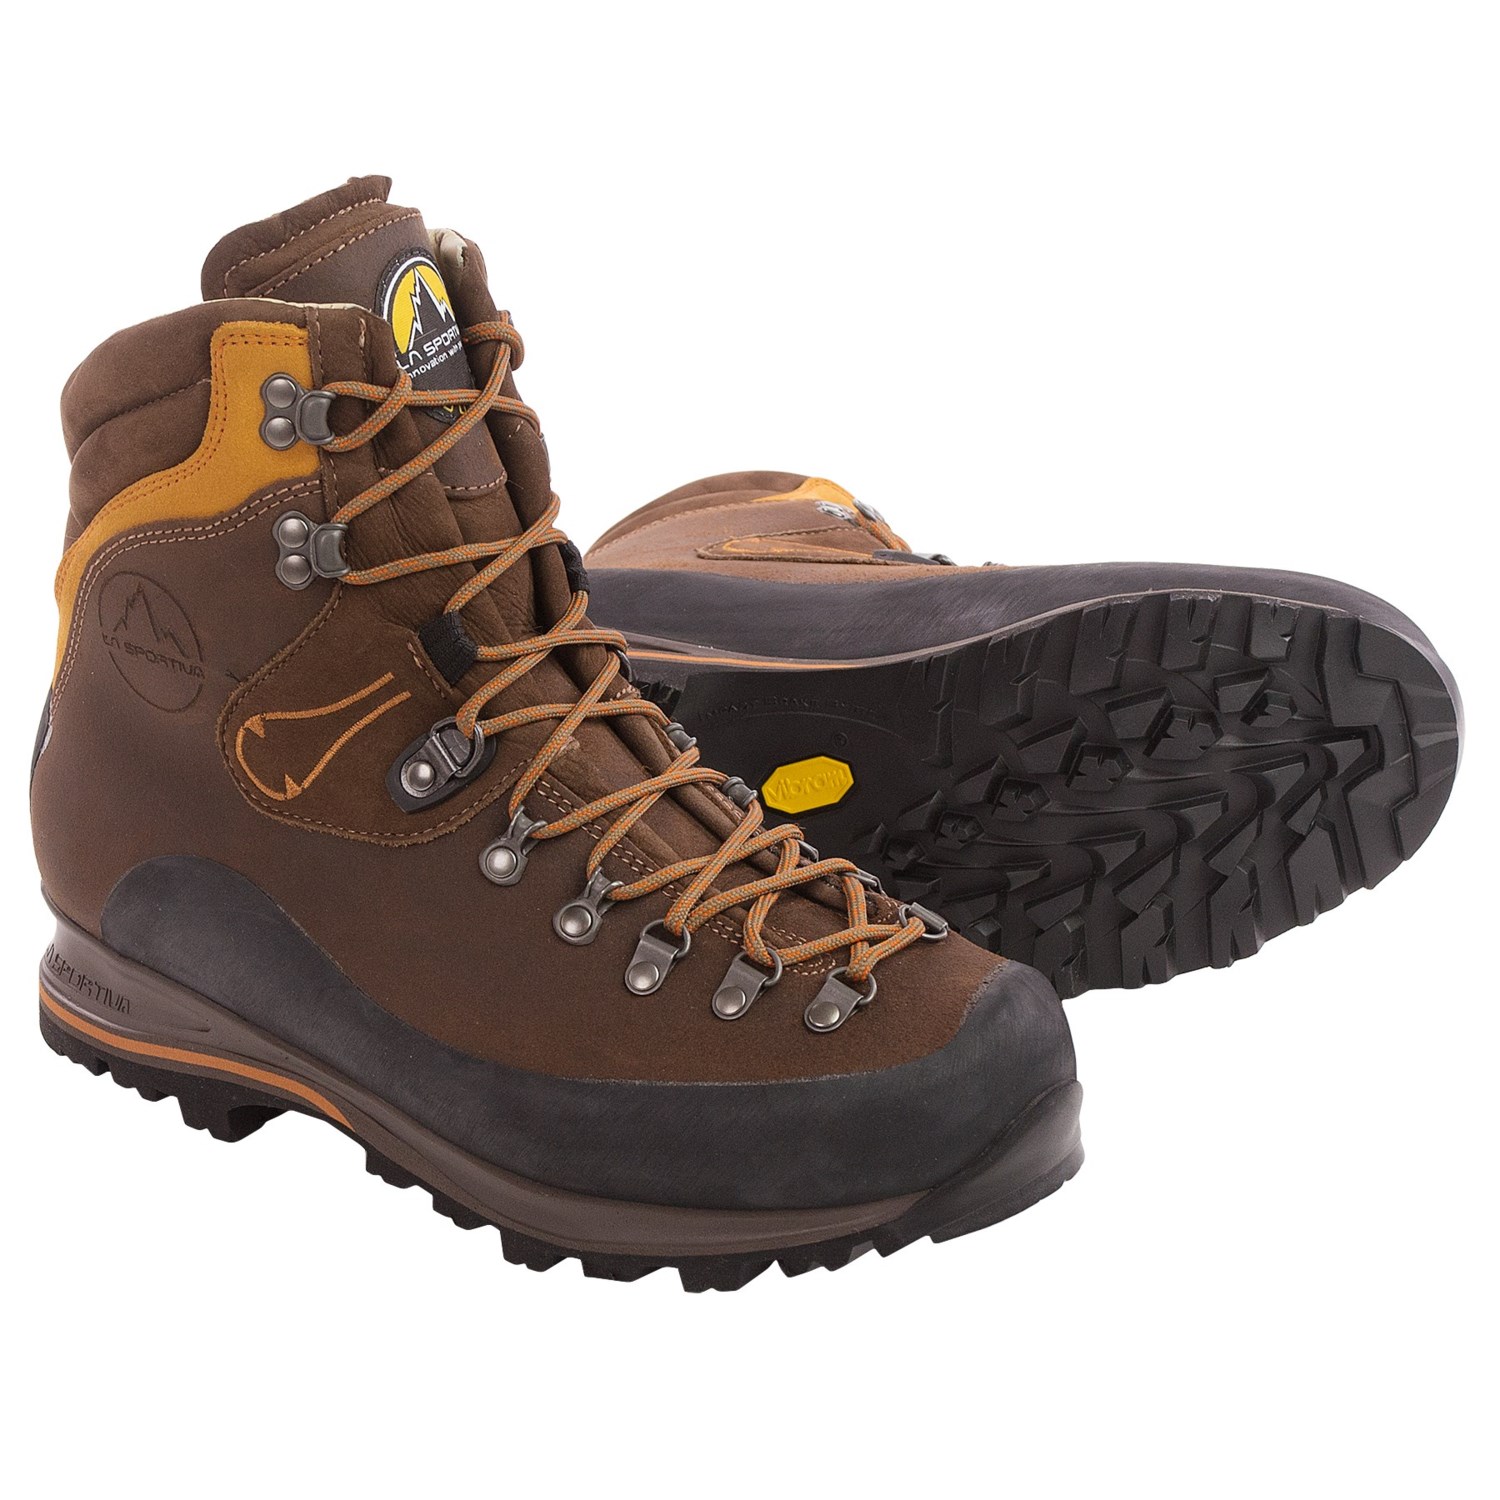 La Sportiva Pamir Hiking Boots (For Men) 105FN - Save 72%